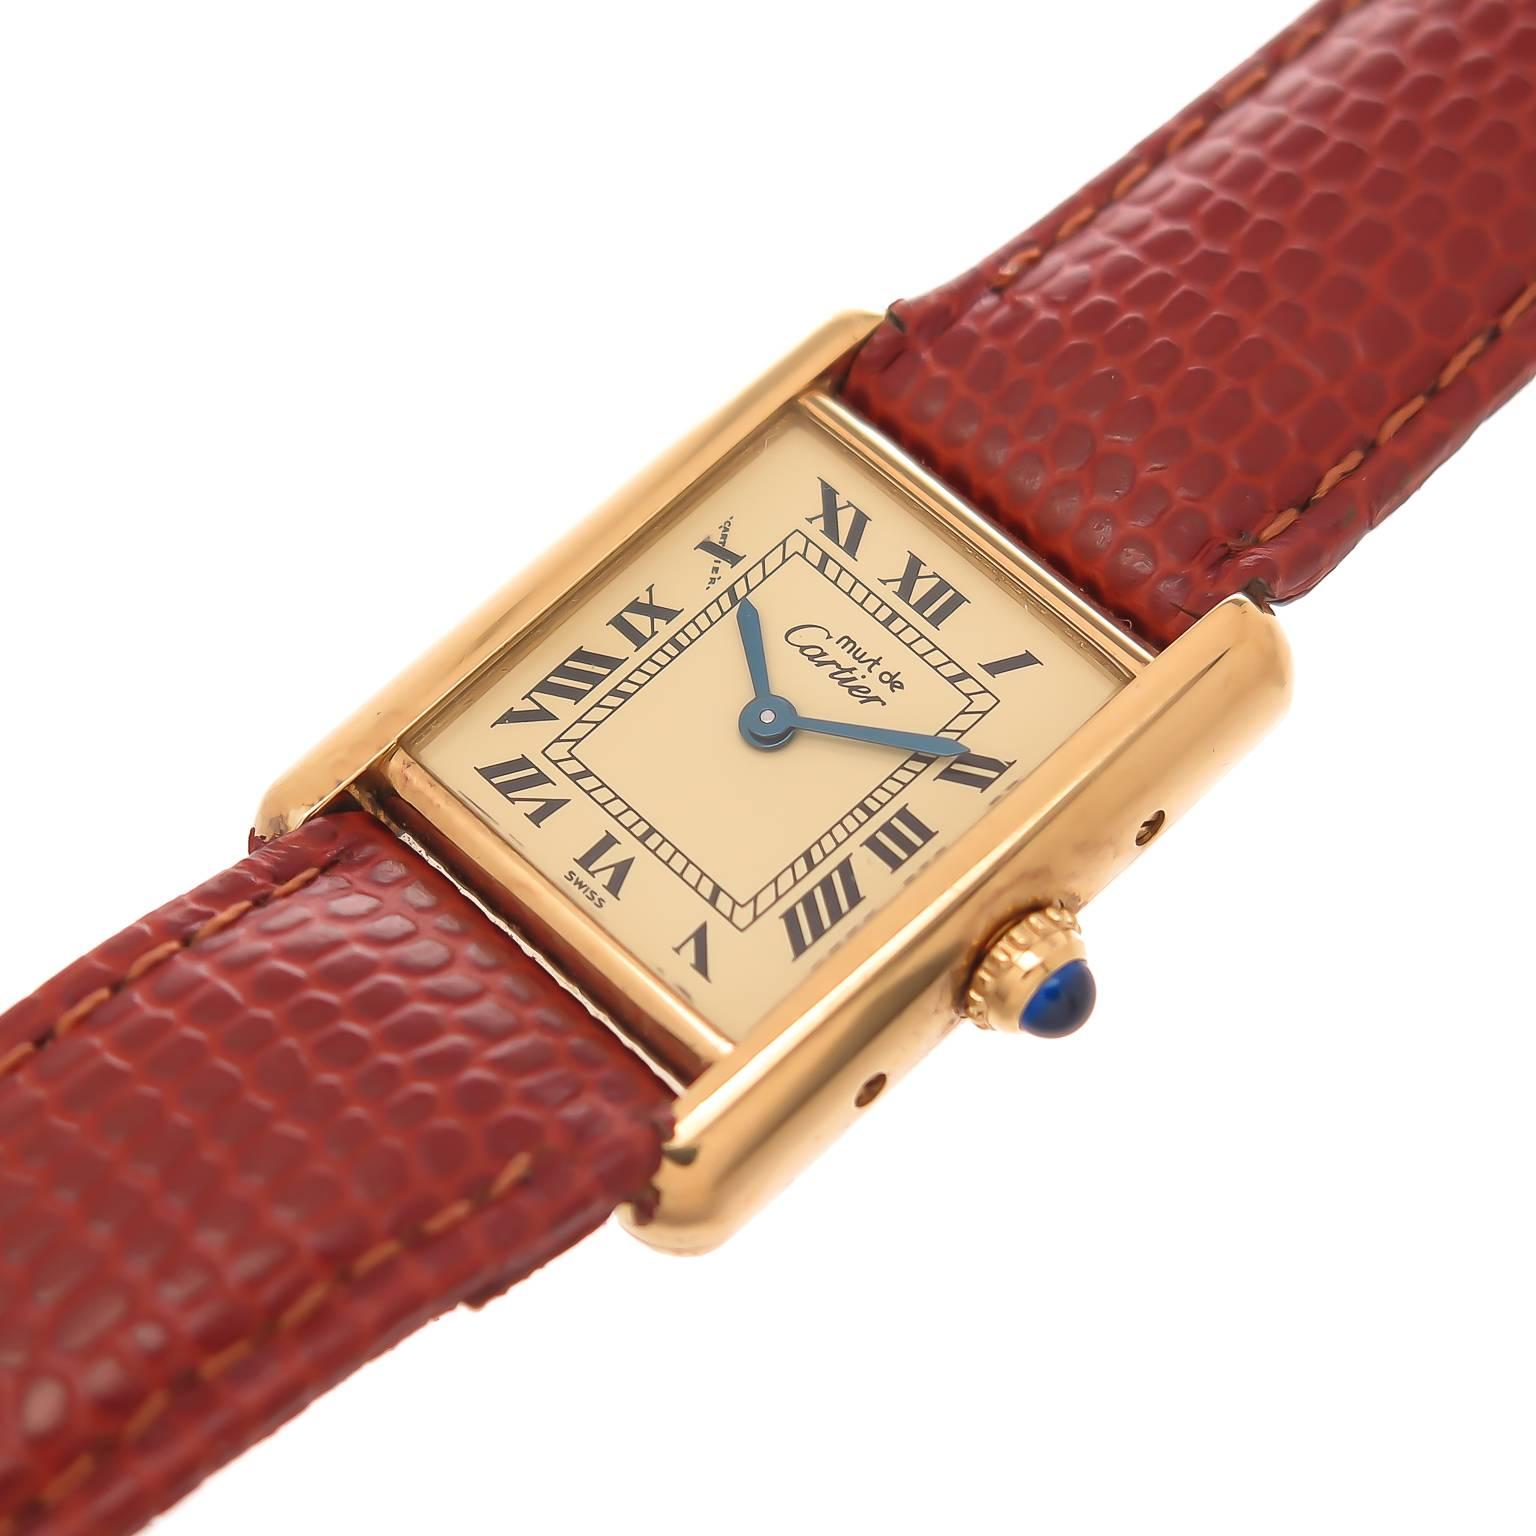 Circa 2000  Cartier mid size Tank Watch, Vermeil, Gold plate on Sterling Silver  case measuring 28MM  X  21MM, Quartz movement, light cream Dial with Black Roman Numerals, Sapphire Crown, New Brown Hadley Roma Lizard Strap and Original Gold Plate